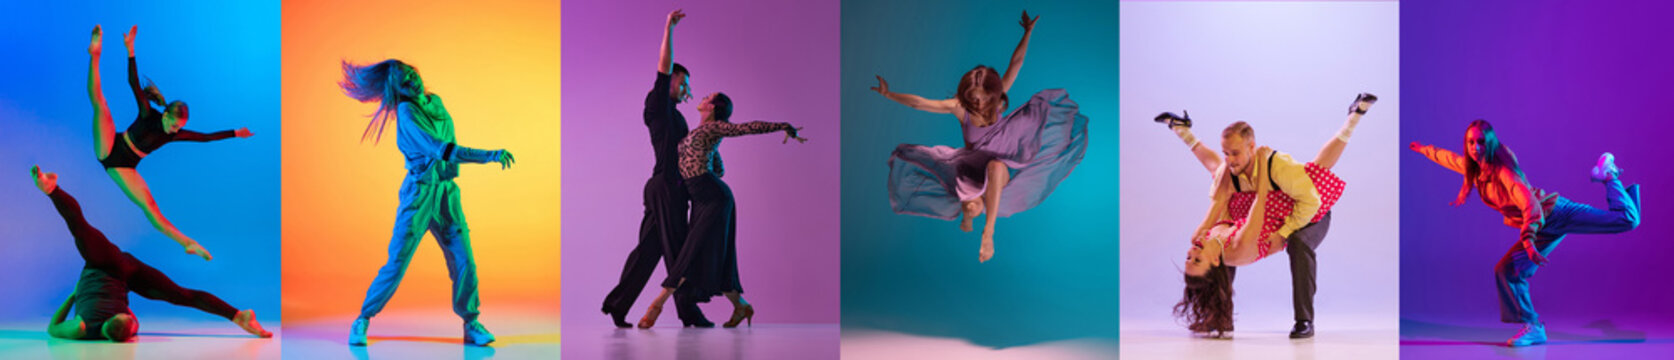 Beauty of choreography. Set of images of young people, men and women dancing diverse dance types against multicolored background in neon. Concept of art, hobby, fashion, youth. Collage